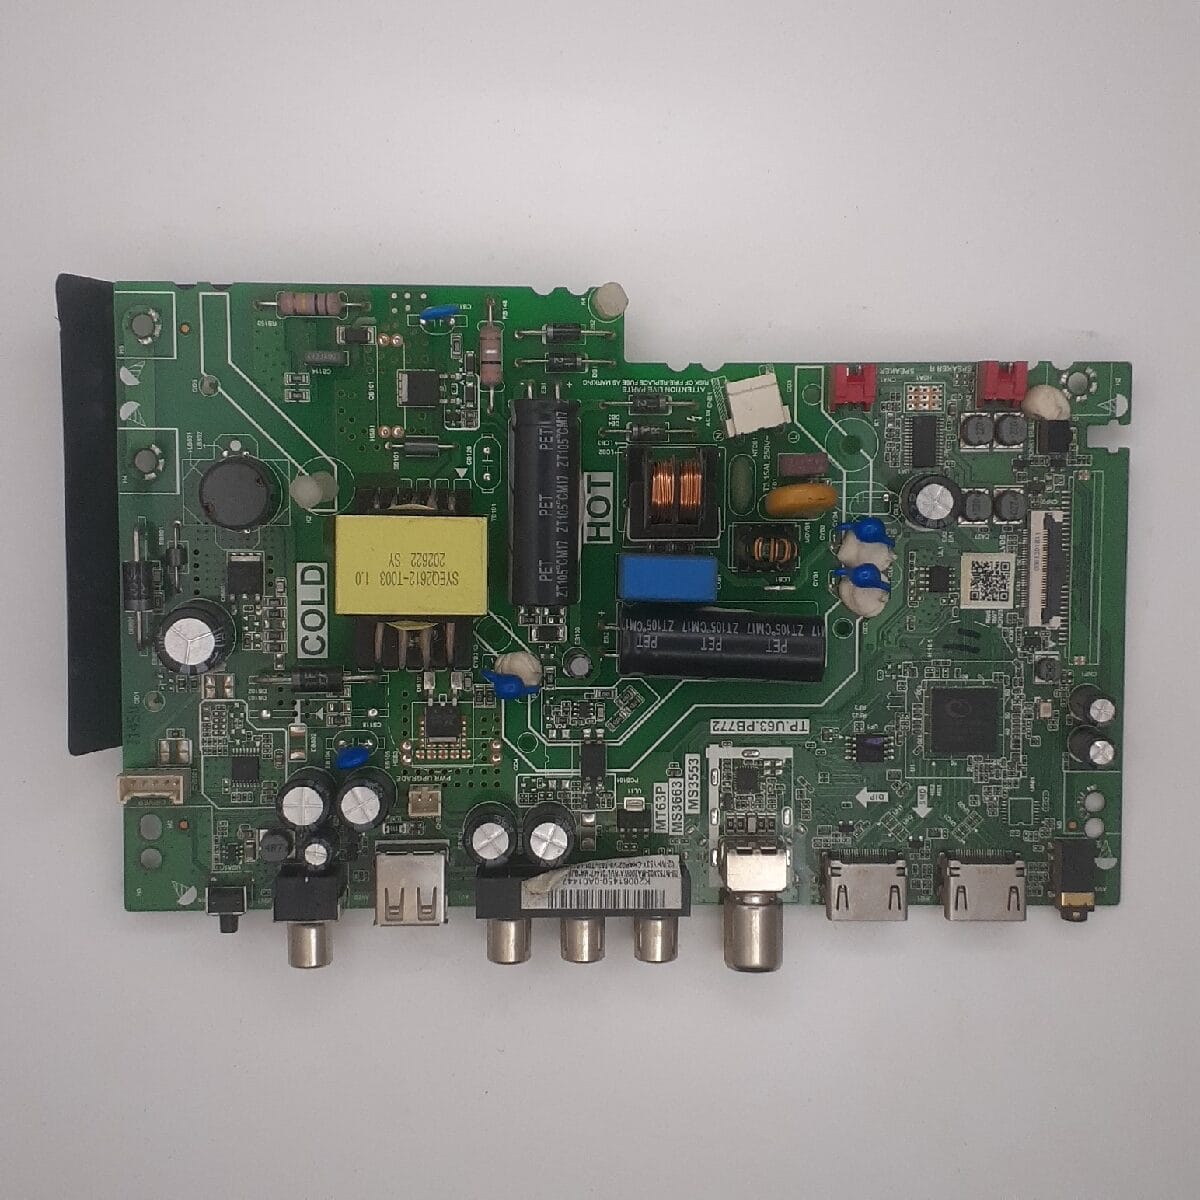 32D310 TCL MOTHERBOARD FOR LED TV